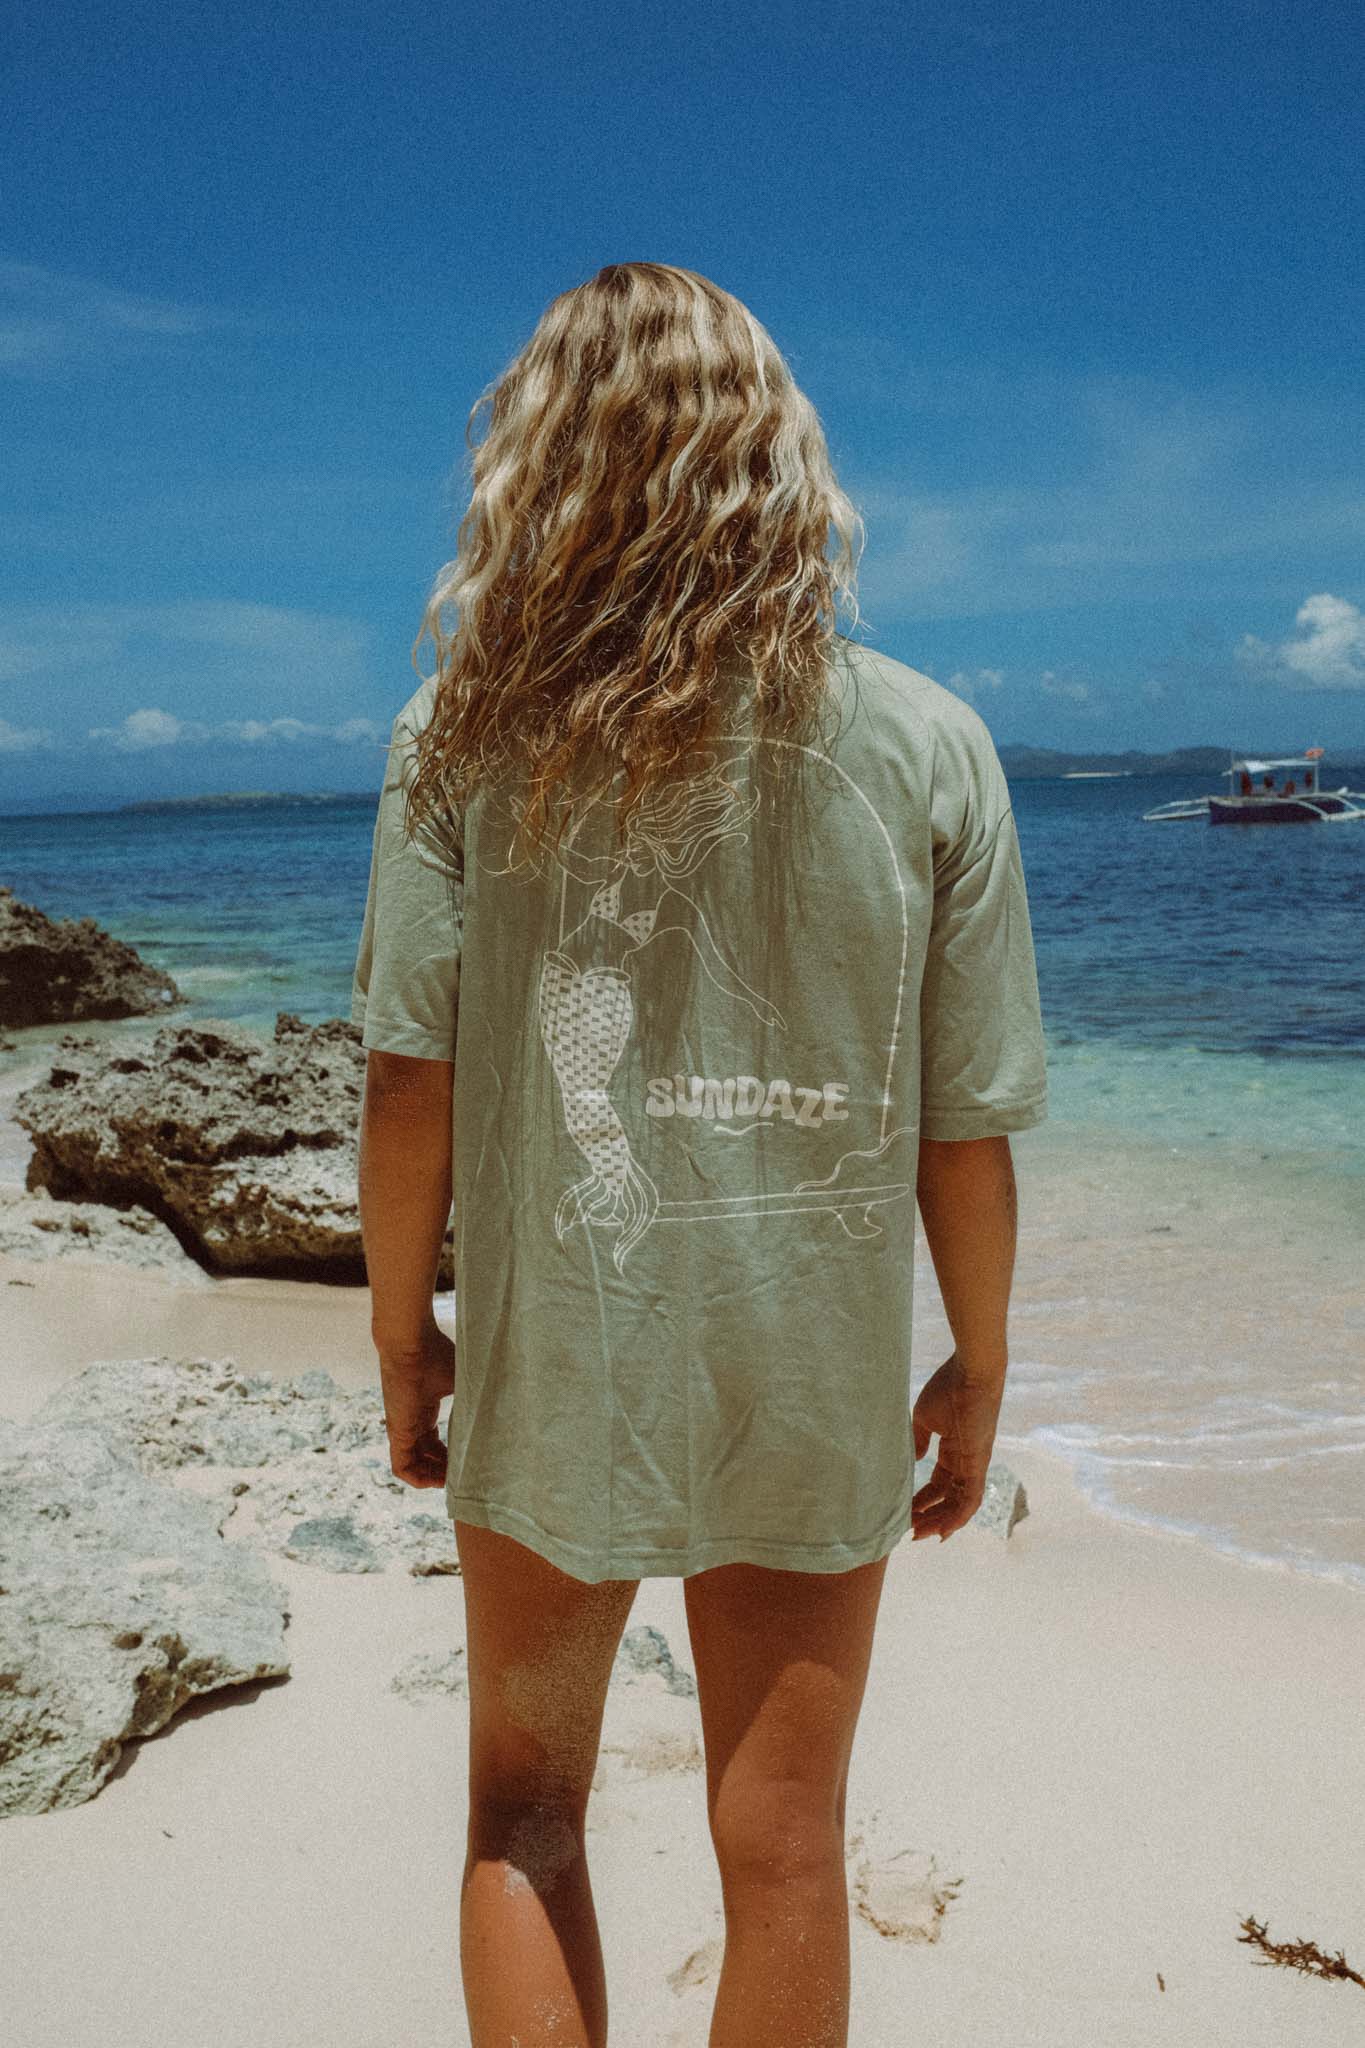 Model at the beach wearing a sun hat and showing the back of her t-shirt, a sage green t-shirt with mermaid illustration